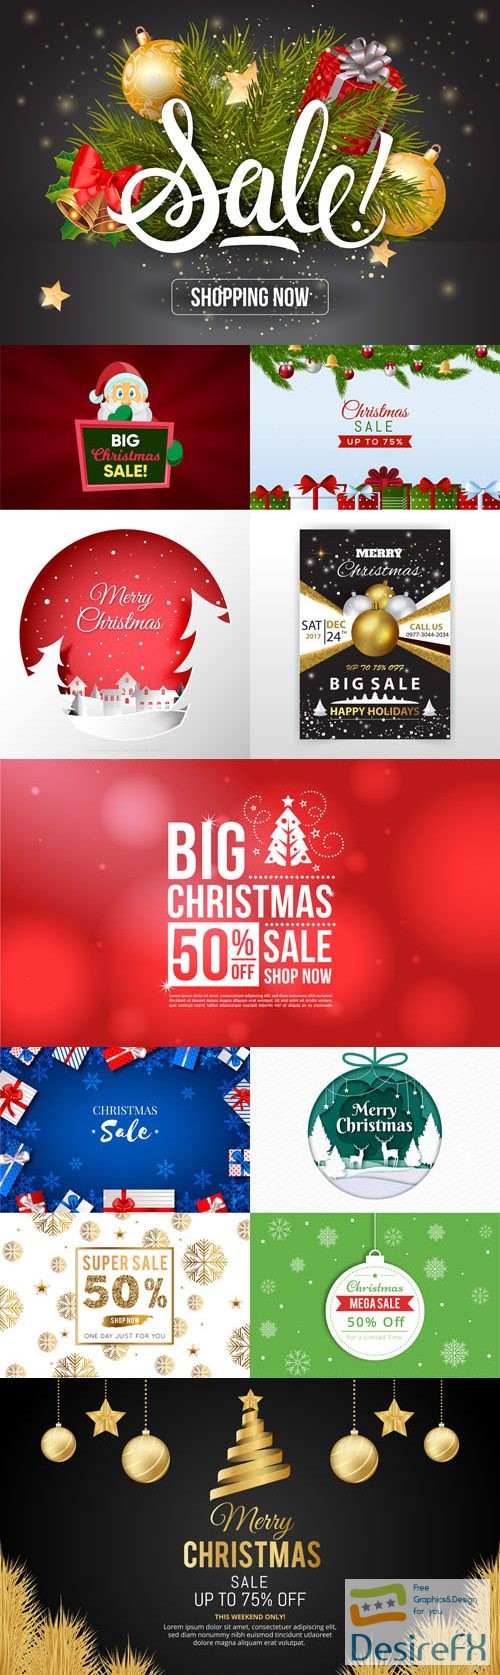 11 Christmas Sales Backgrounds in Vector